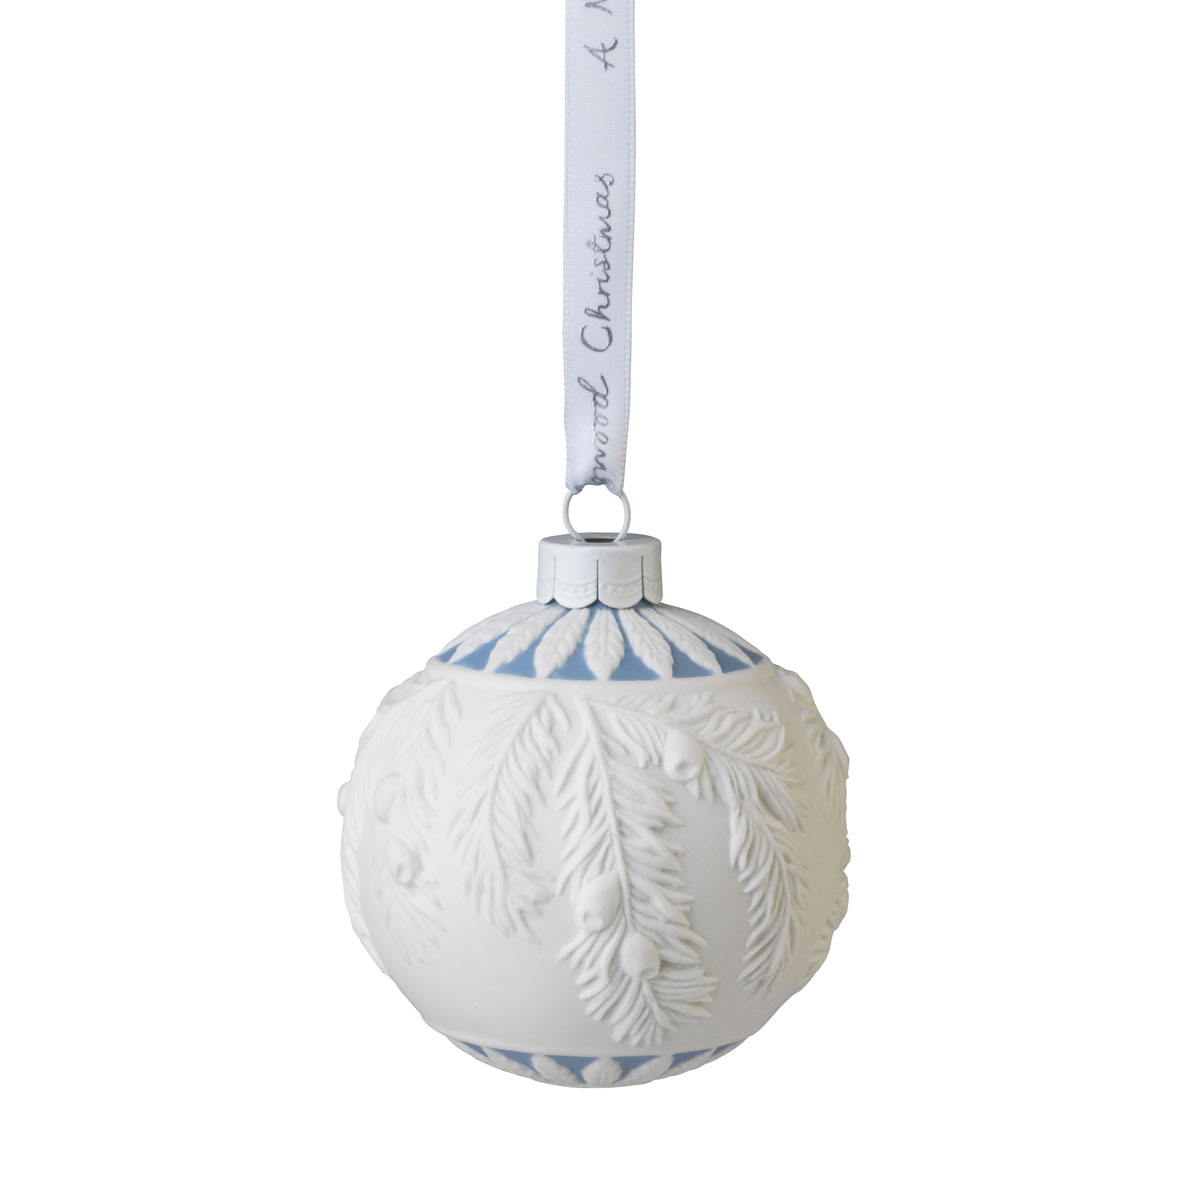 Wedgwood 2021 Frosted Mistletoe Bauble Ornament